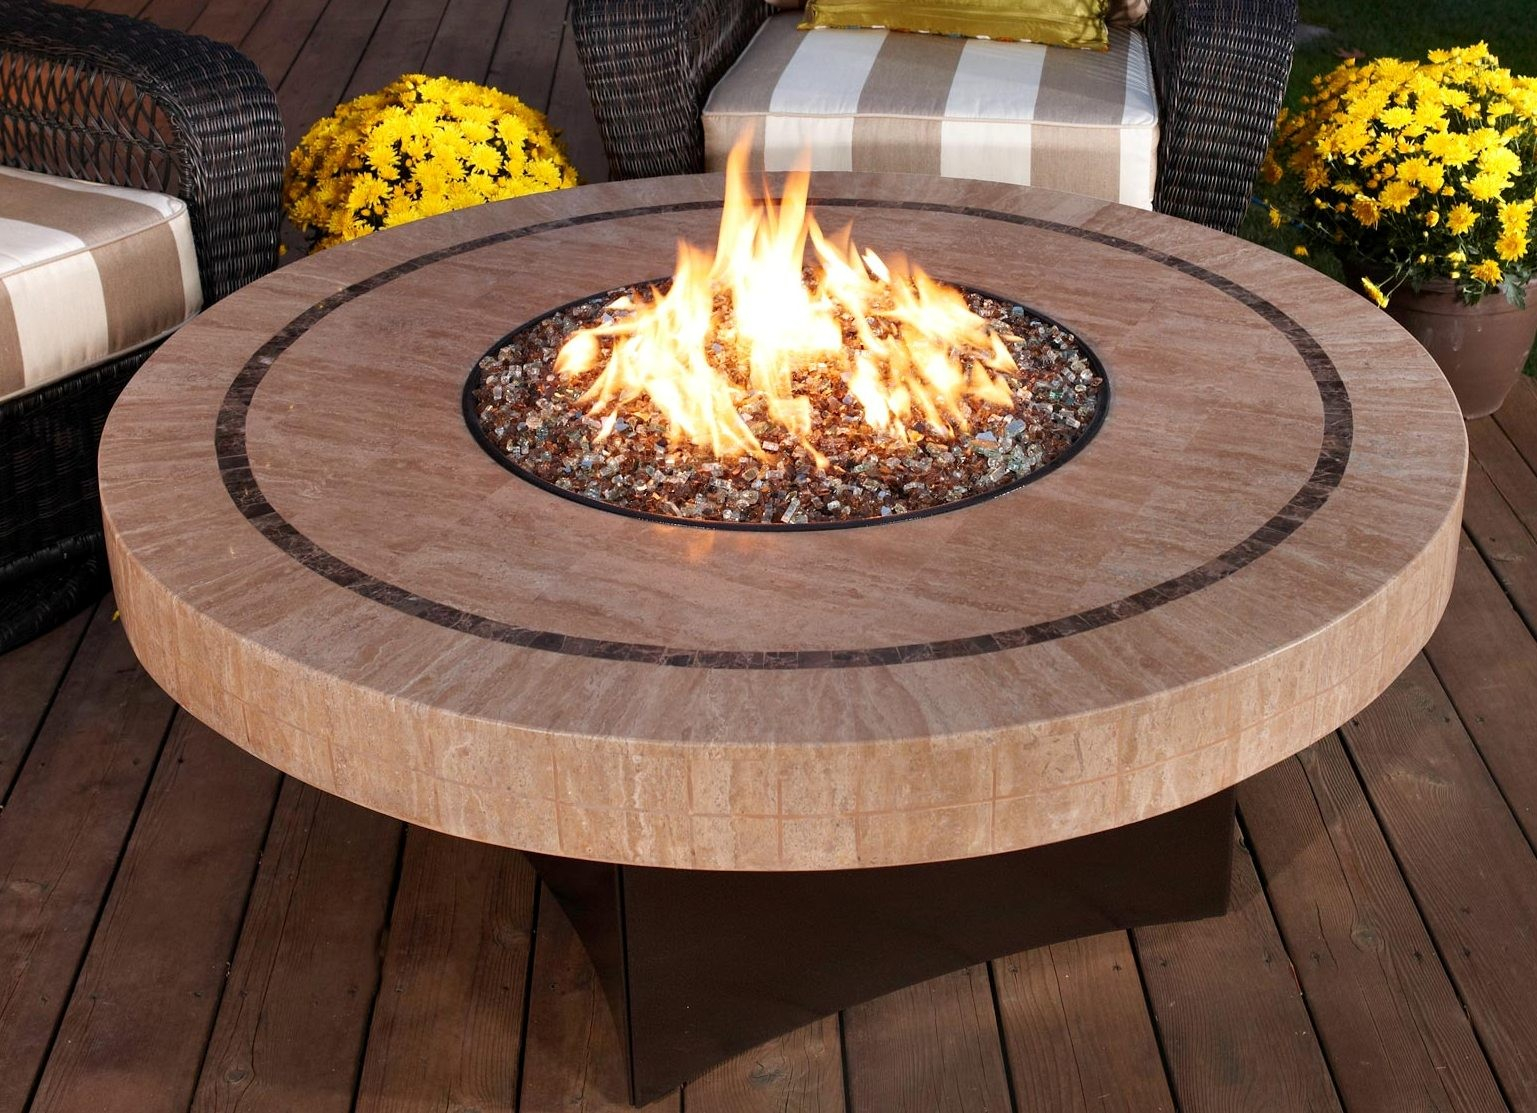 Portable Outdoor Gas Fire Pit Fireplace Design Ideas inside dimensions 1537 X 1113